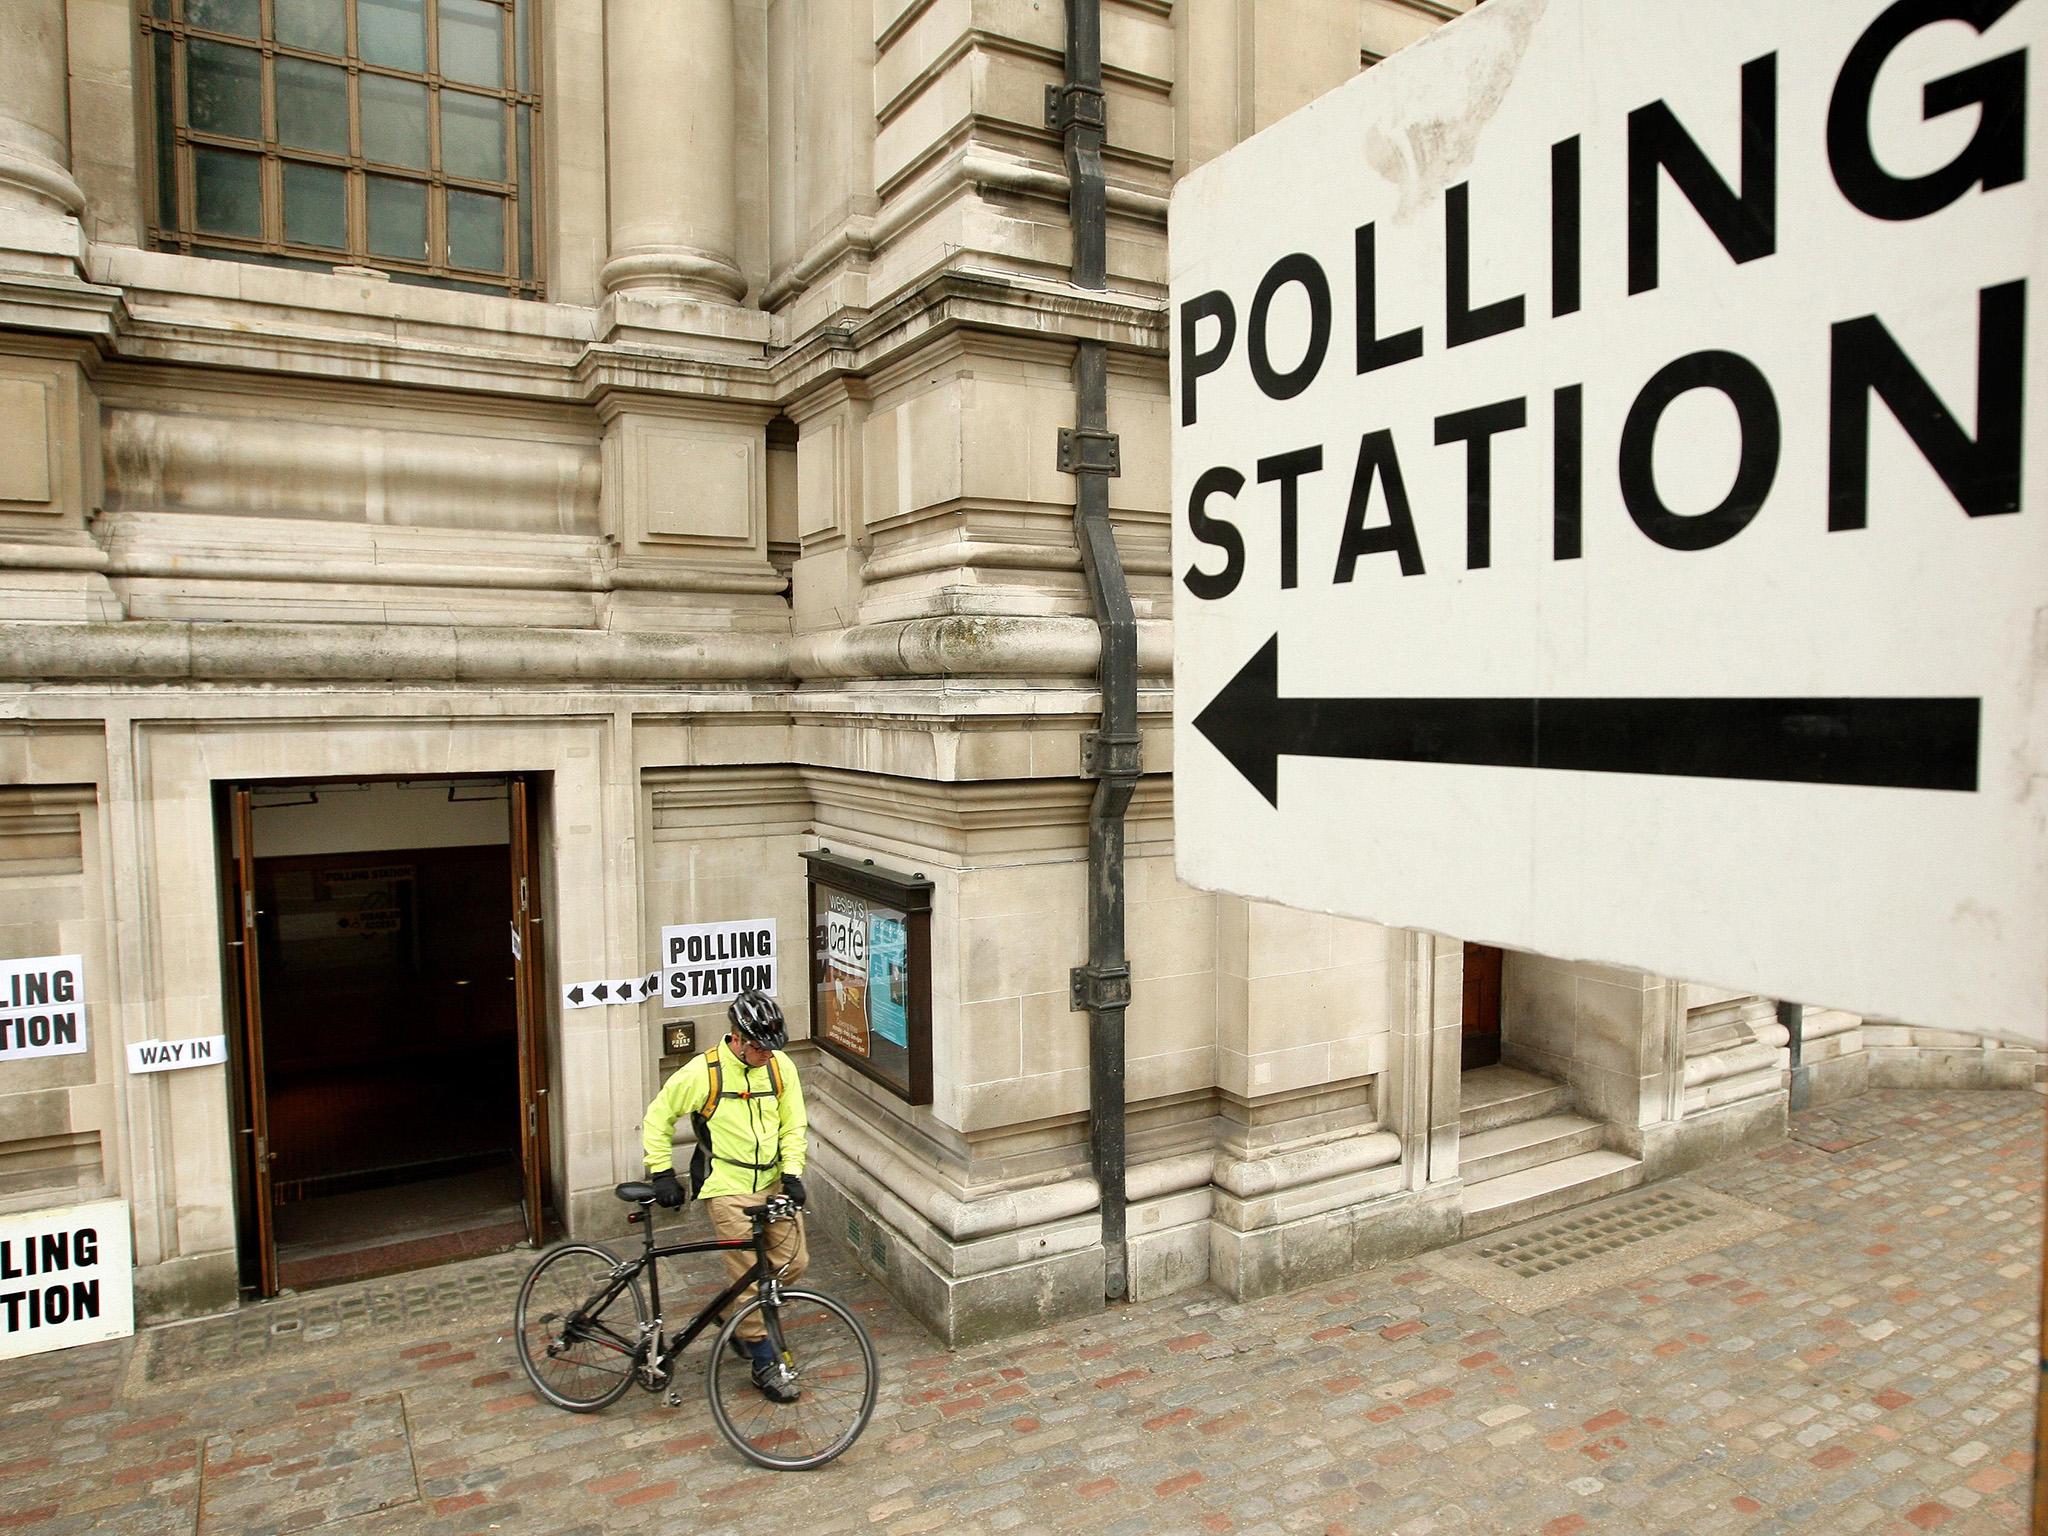 Voters must be signed up by 22 May to take part in the election